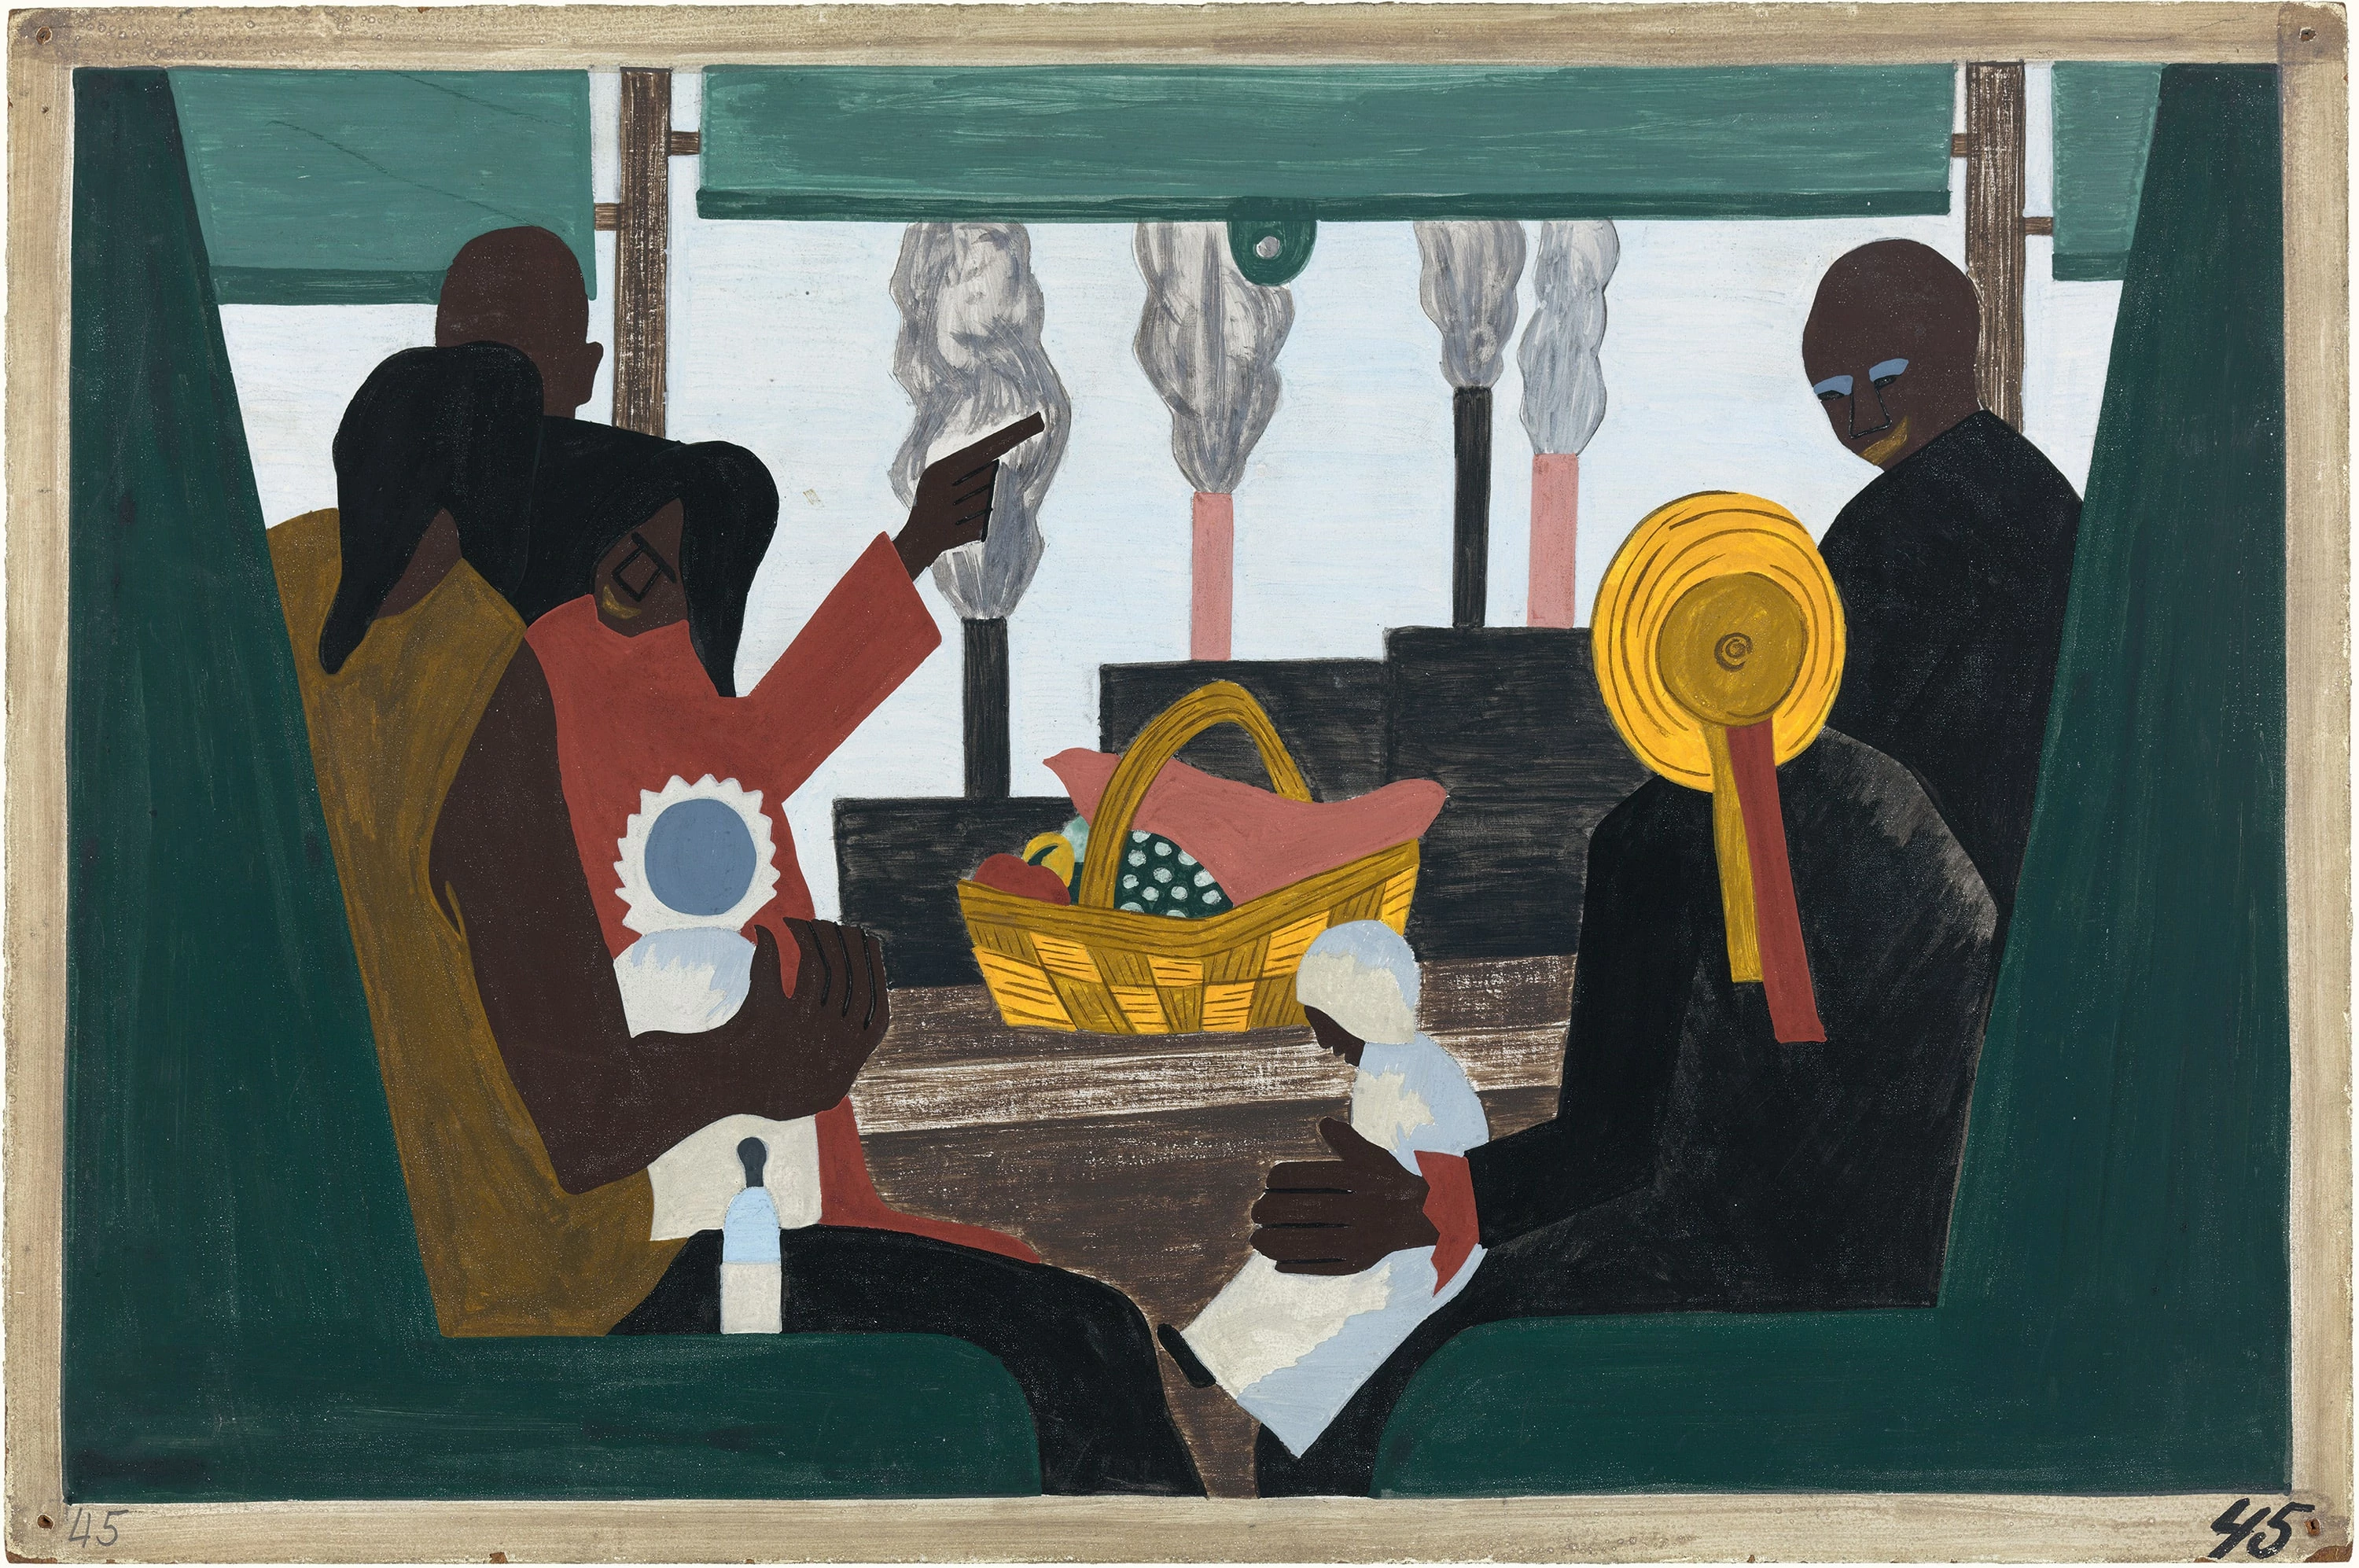 Migration Series No.45: The migrants arrived in Pittsburgh, one of the great industrial centers of the North, Jacob Lawrence